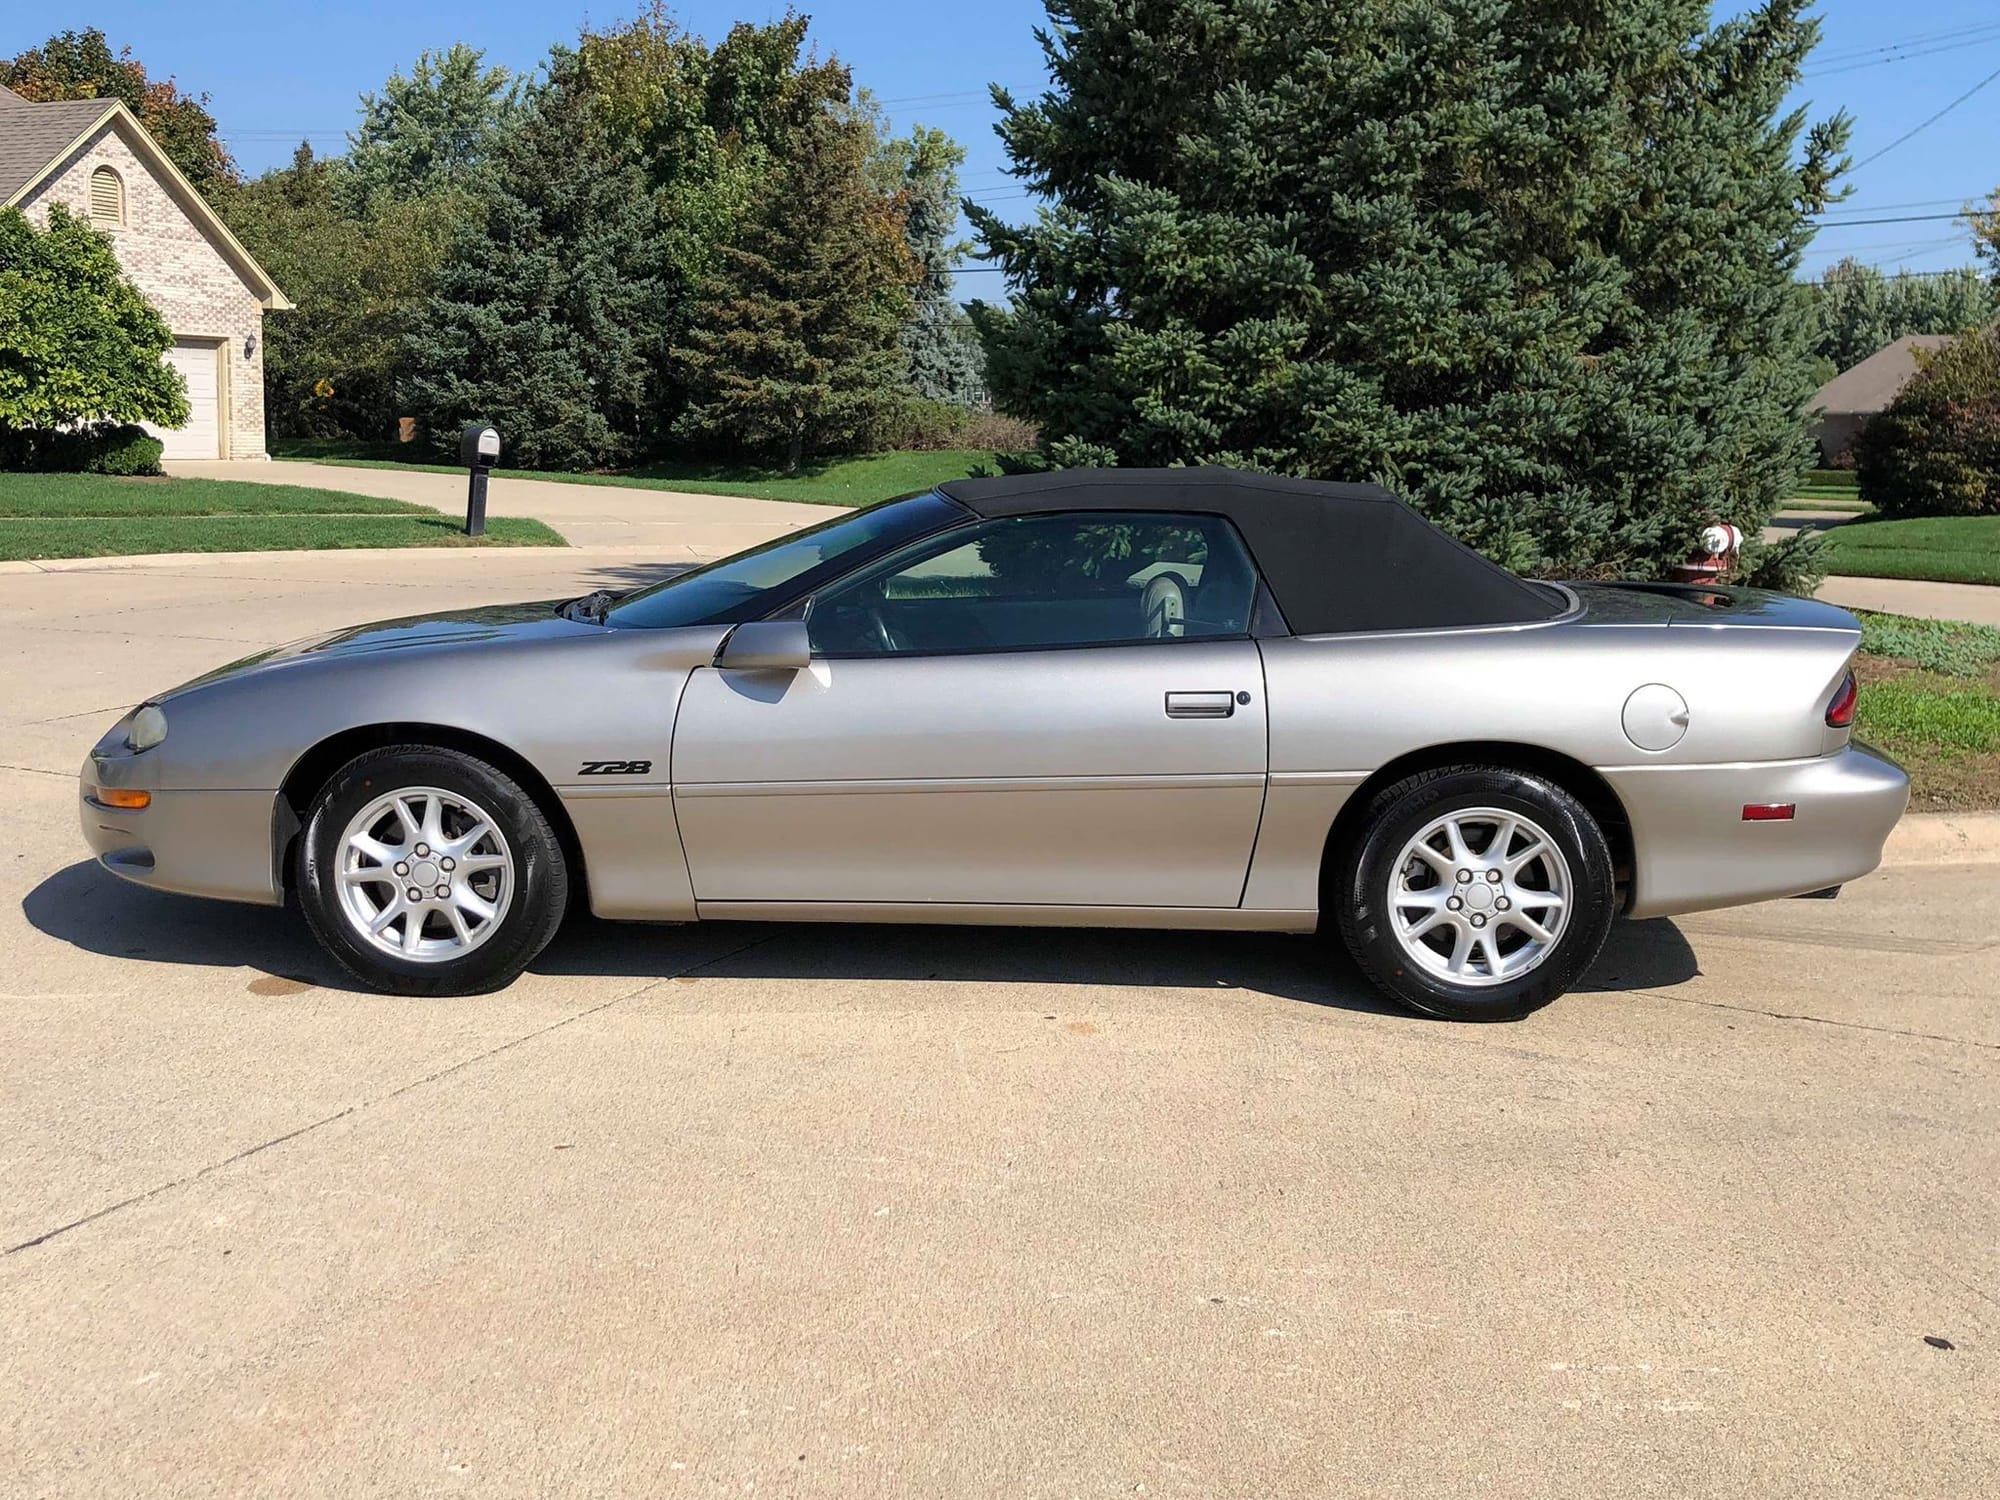 2000 Camaro Z28 Convertible Roller or Project - LS1TECH - Camaro and  Firebird Forum Discussion